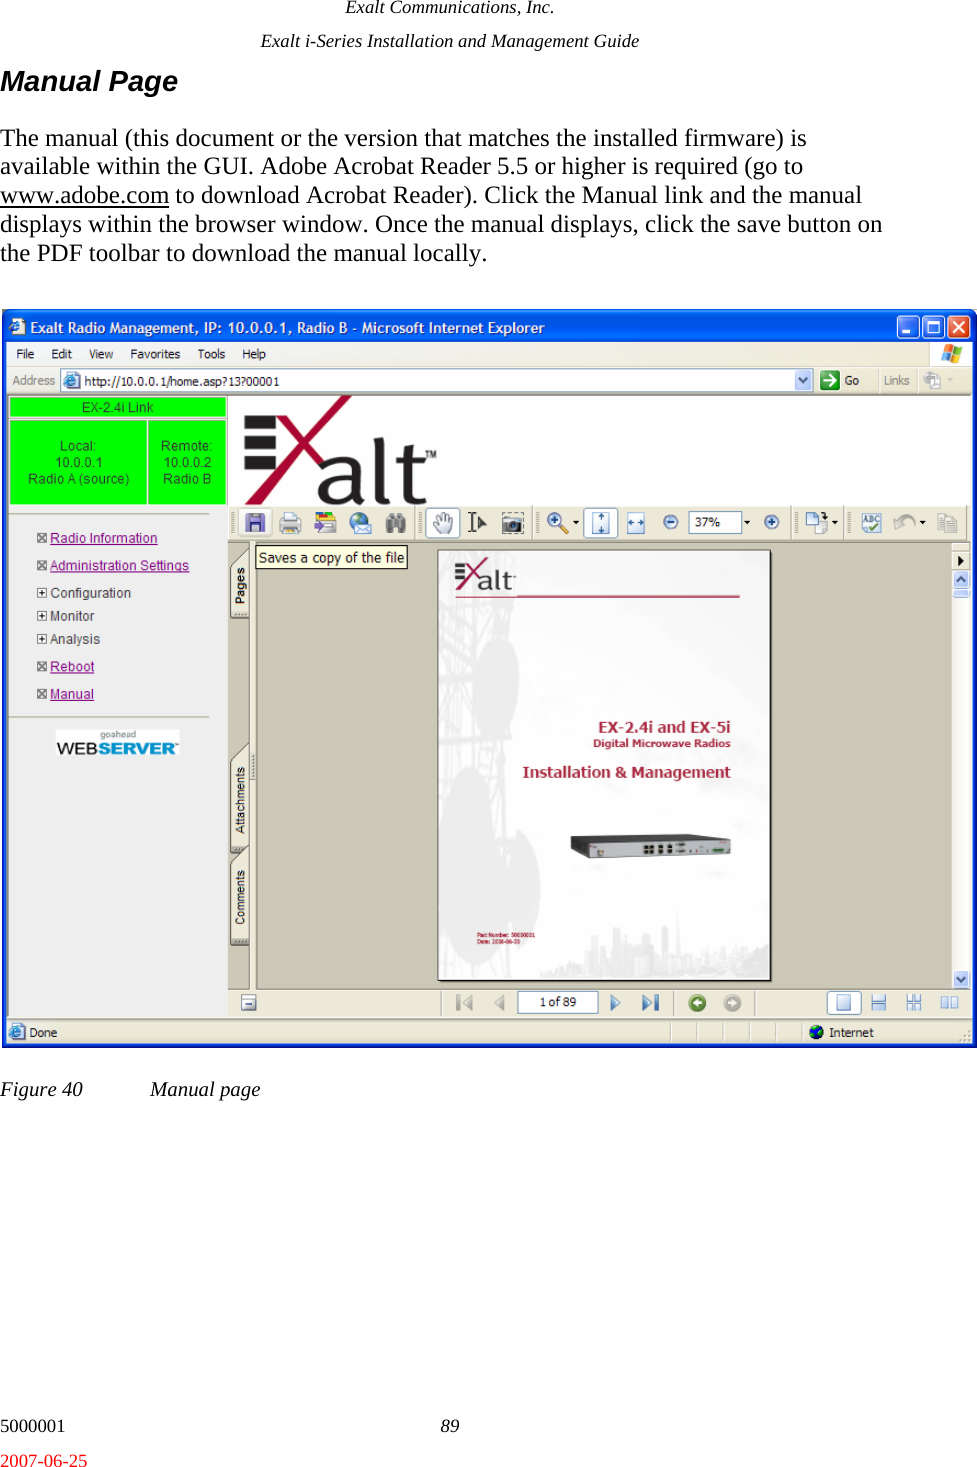 Exalt Communications, Inc. Exalt i-Series Installation and Management Guide 5000001  89 2007-06-25 Manual Page The manual (this document or the version that matches the installed firmware) is available within the GUI. Adobe Acrobat Reader 5.5 or higher is required (go to www.adobe.com to download Acrobat Reader). Click the Manual link and the manual displays within the browser window. Once the manual displays, click the save button on the PDF toolbar to download the manual locally. Figure 40  Manual page 